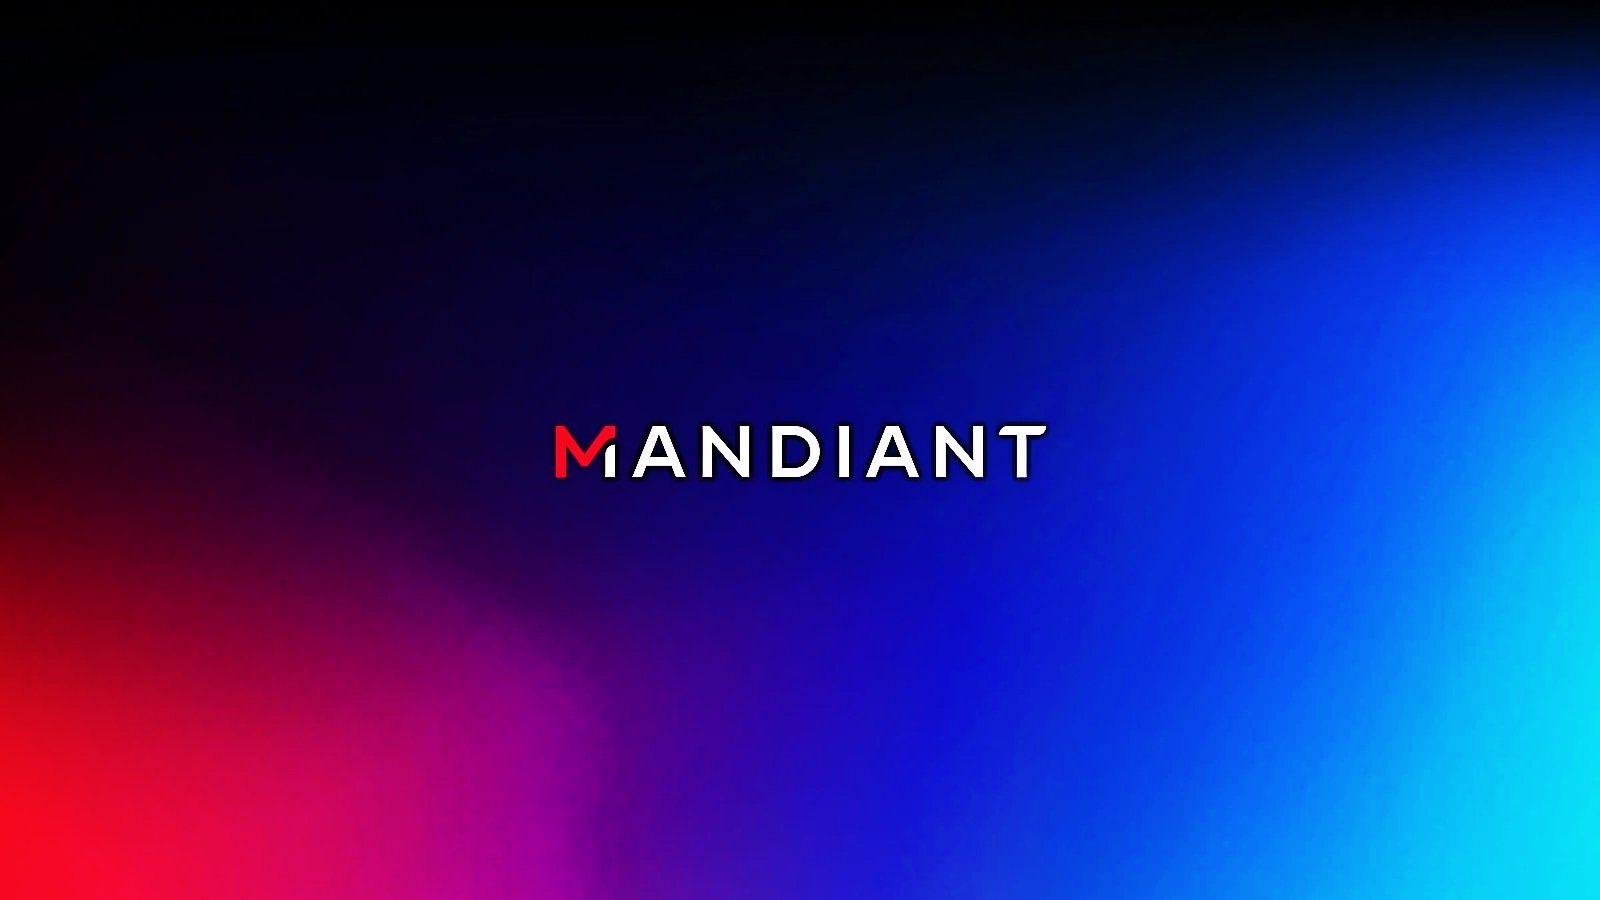 Mandiant’s X account hacked by crypto Drainer-as-a-Service gang